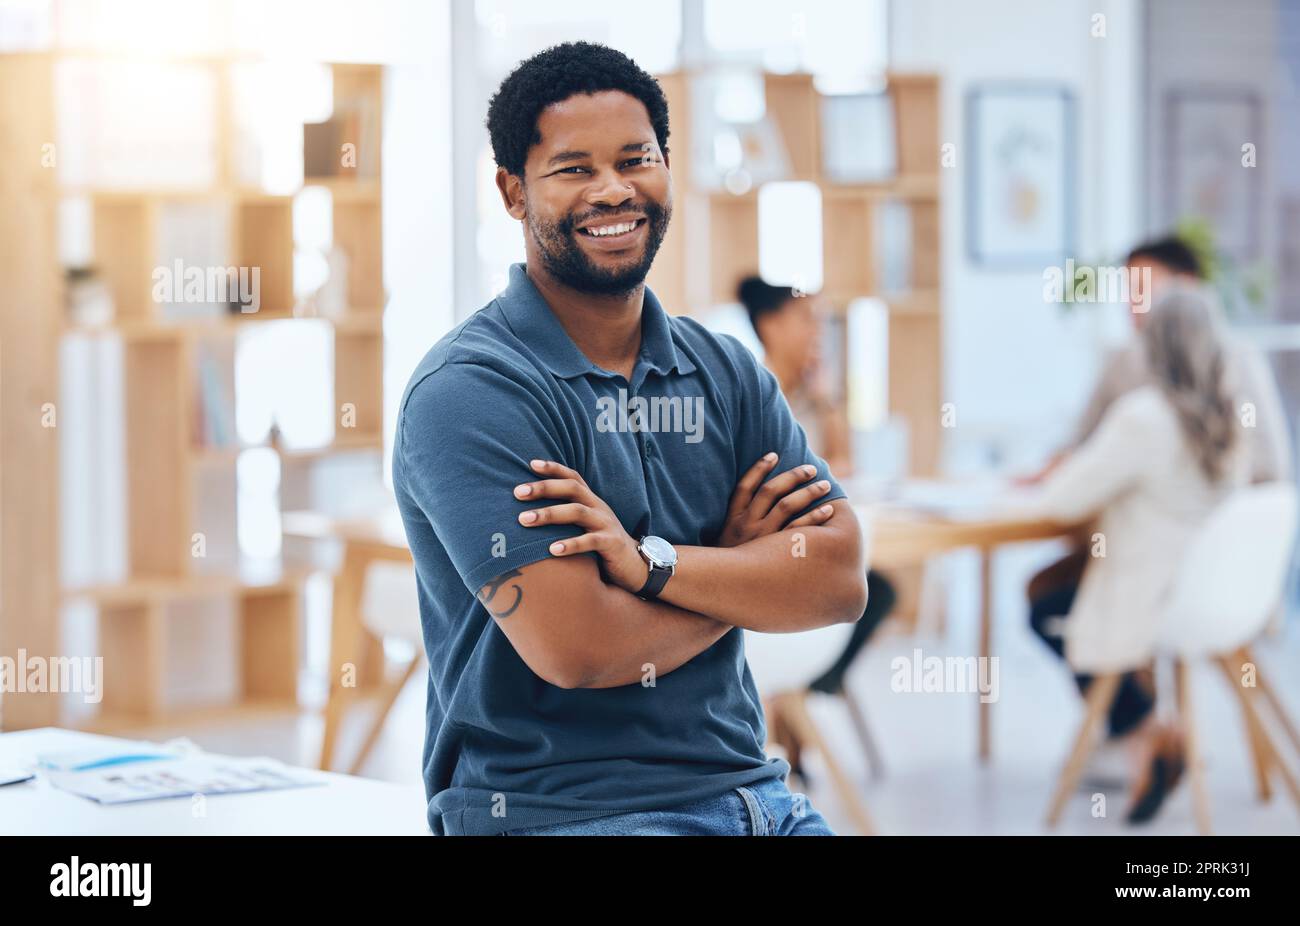 Business meeting, black man and smile portrait with arms crossed at coworking conference desk. Casual corporate male with proud, confident and happy expression at office building boardroom. Stock Photo